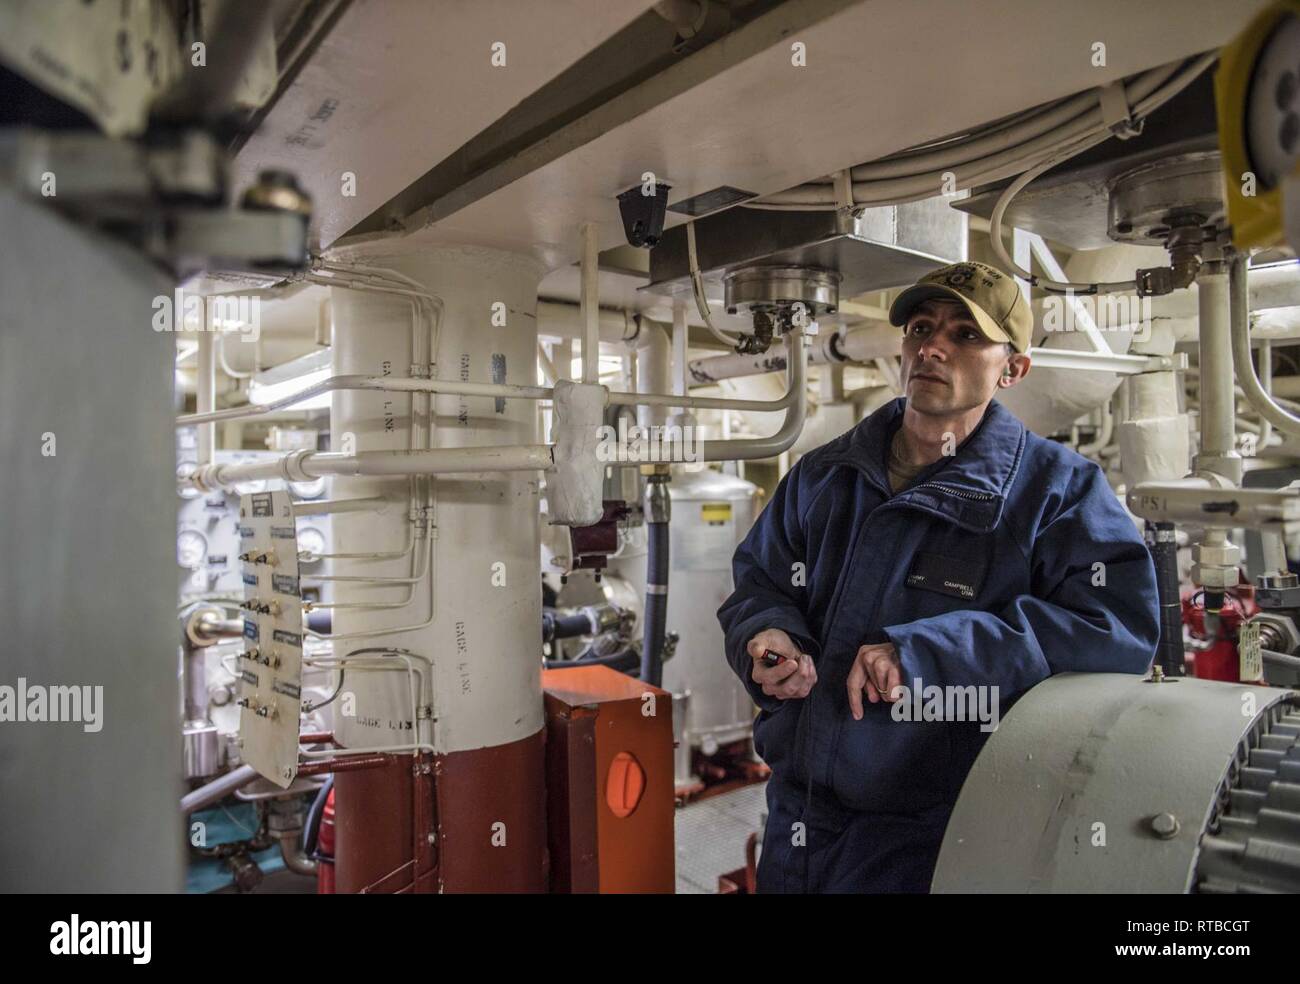 COPENHAGEN, Denmark (Feb. 03, 2019) – Hull Maintenance Technician 1st Class Jimmy Campbell does a maintenance check in aft steering aboard the Arleigh Burke-class guided-missile destroyer USS Porter (DDG 78) in Copenhagen, Denmark Feb 3, 2019. Porter, forward-deployed to Rota, Spain, is on its sixth patrol in the U.S. 6th Fleet area of operations in support of U.S national security interests in Europe and Africa. Stock Photo